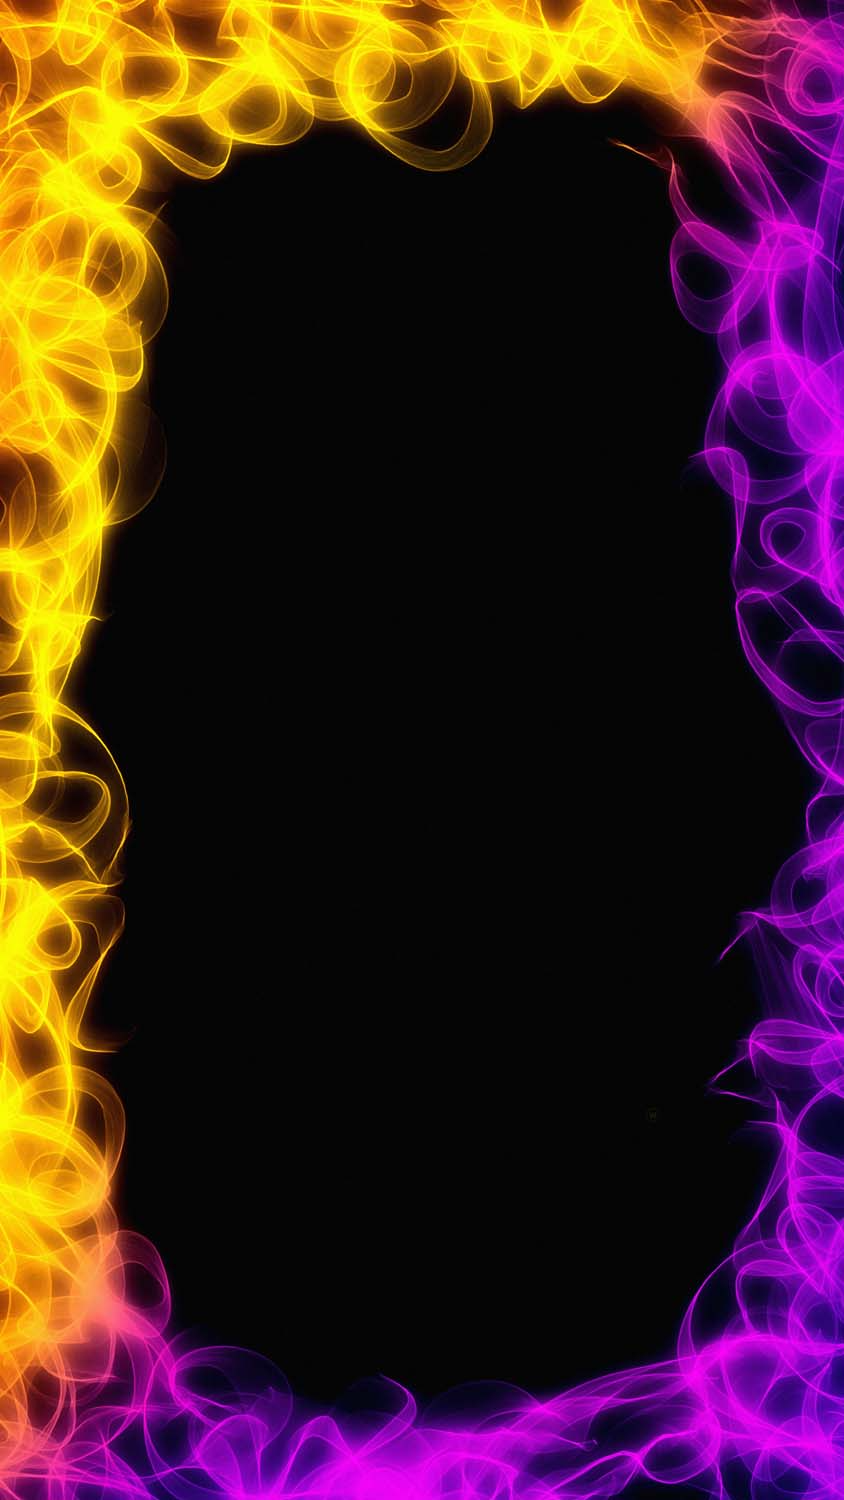 Fire Frame IPhone Wallpaper HD  IPhone Wallpapers